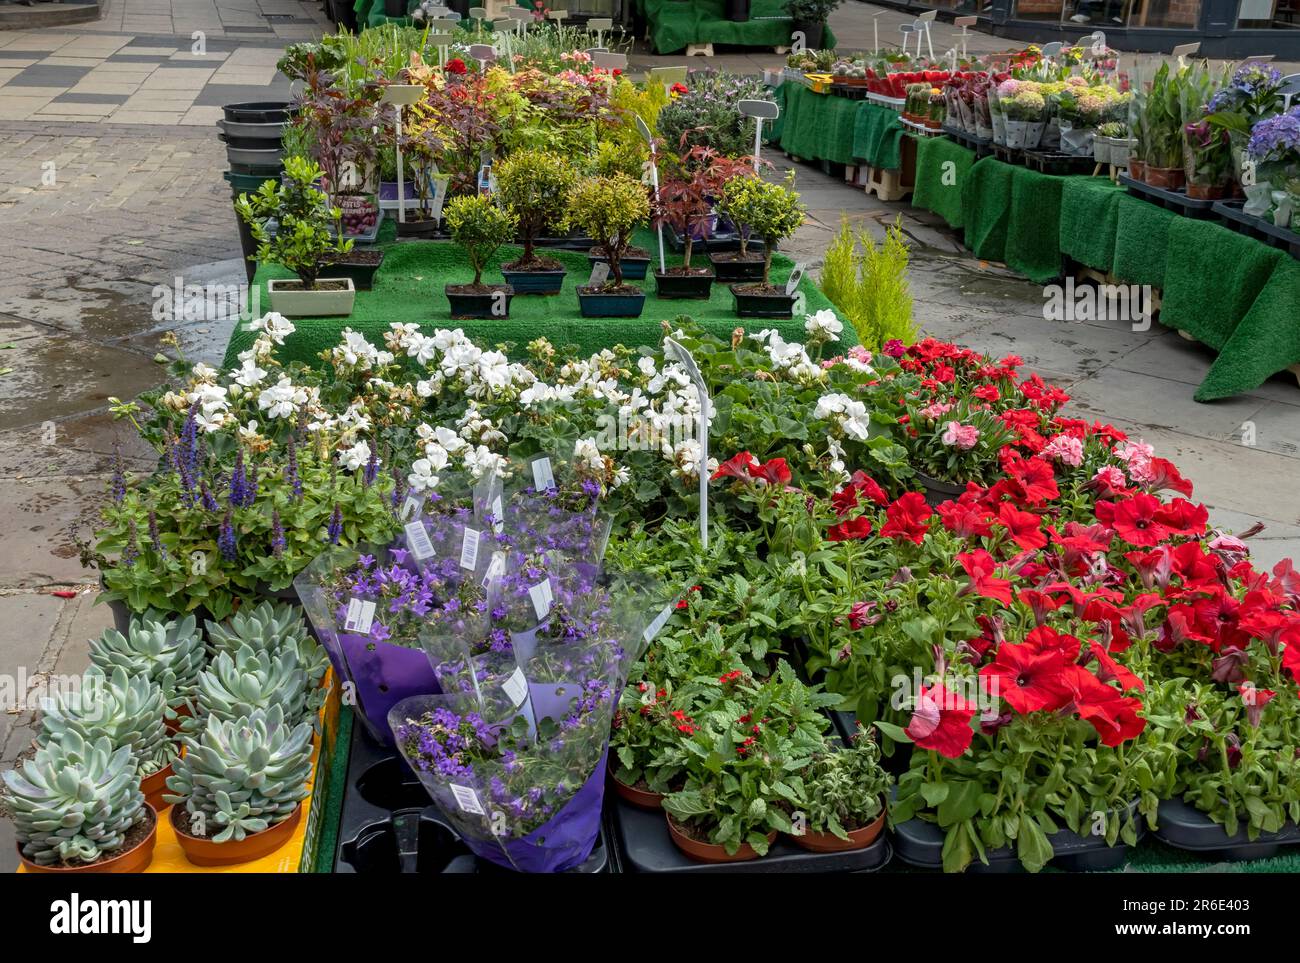 Plants flowers for sale selling on outdoor market stall stalls in the city centre in summer York North Yorkshire England UK Britain Stock Photo